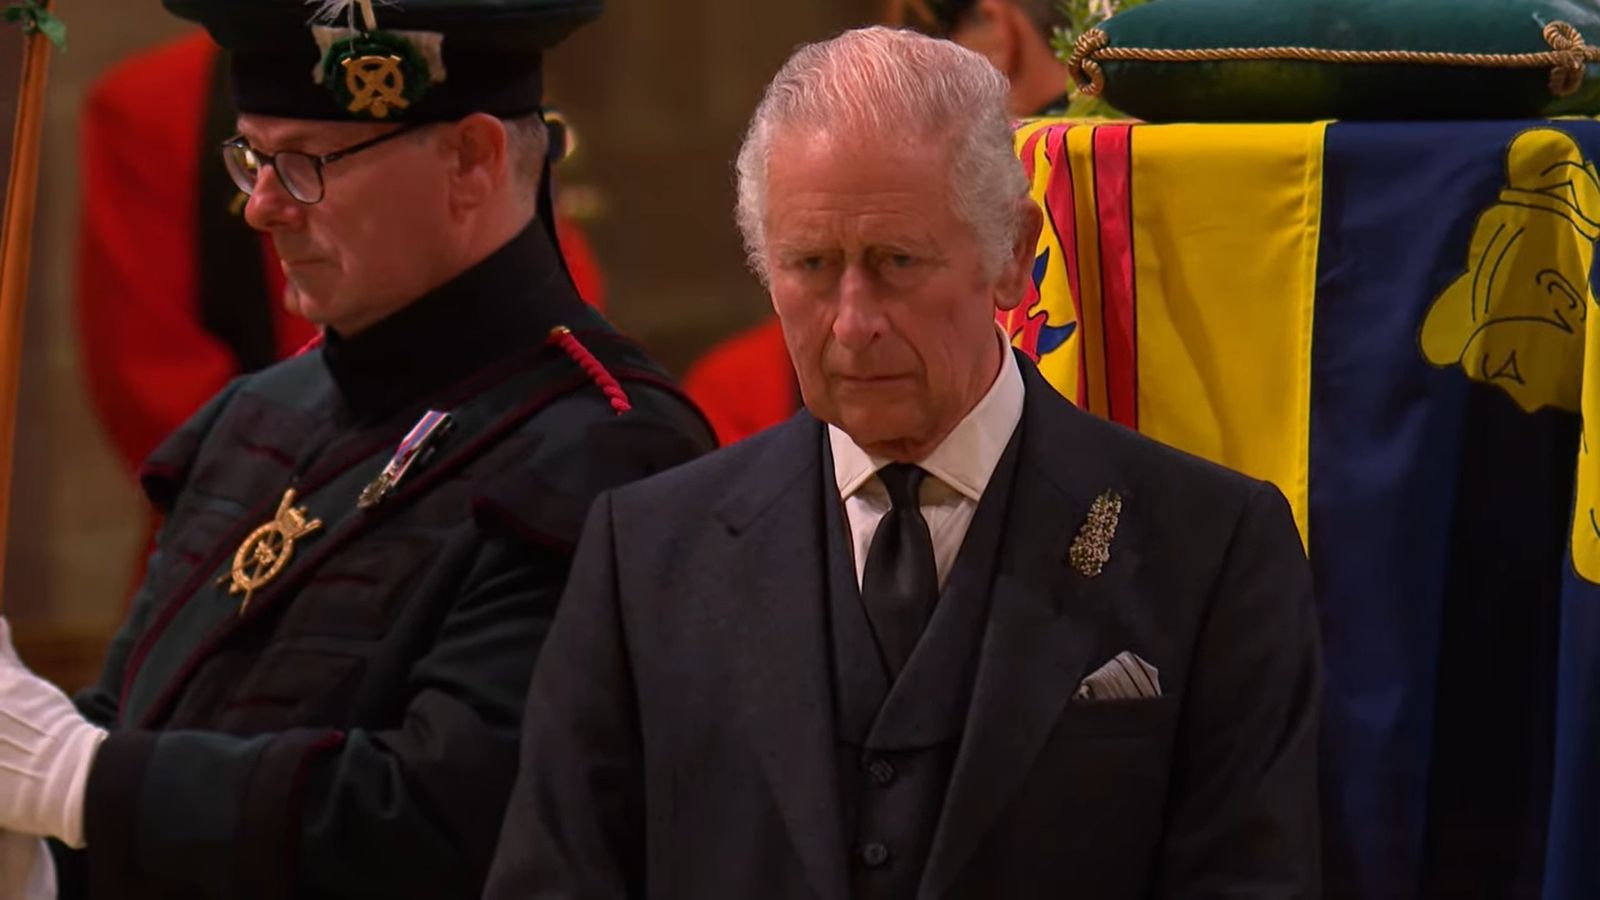 king-charles-iii-sparks-health-fears-after-he-struggled-to-maintain-his-balance-during-queen-elizabeths-procession-camillas-husband-allegedly-unhealthy-to-walk-40-minutes-straight